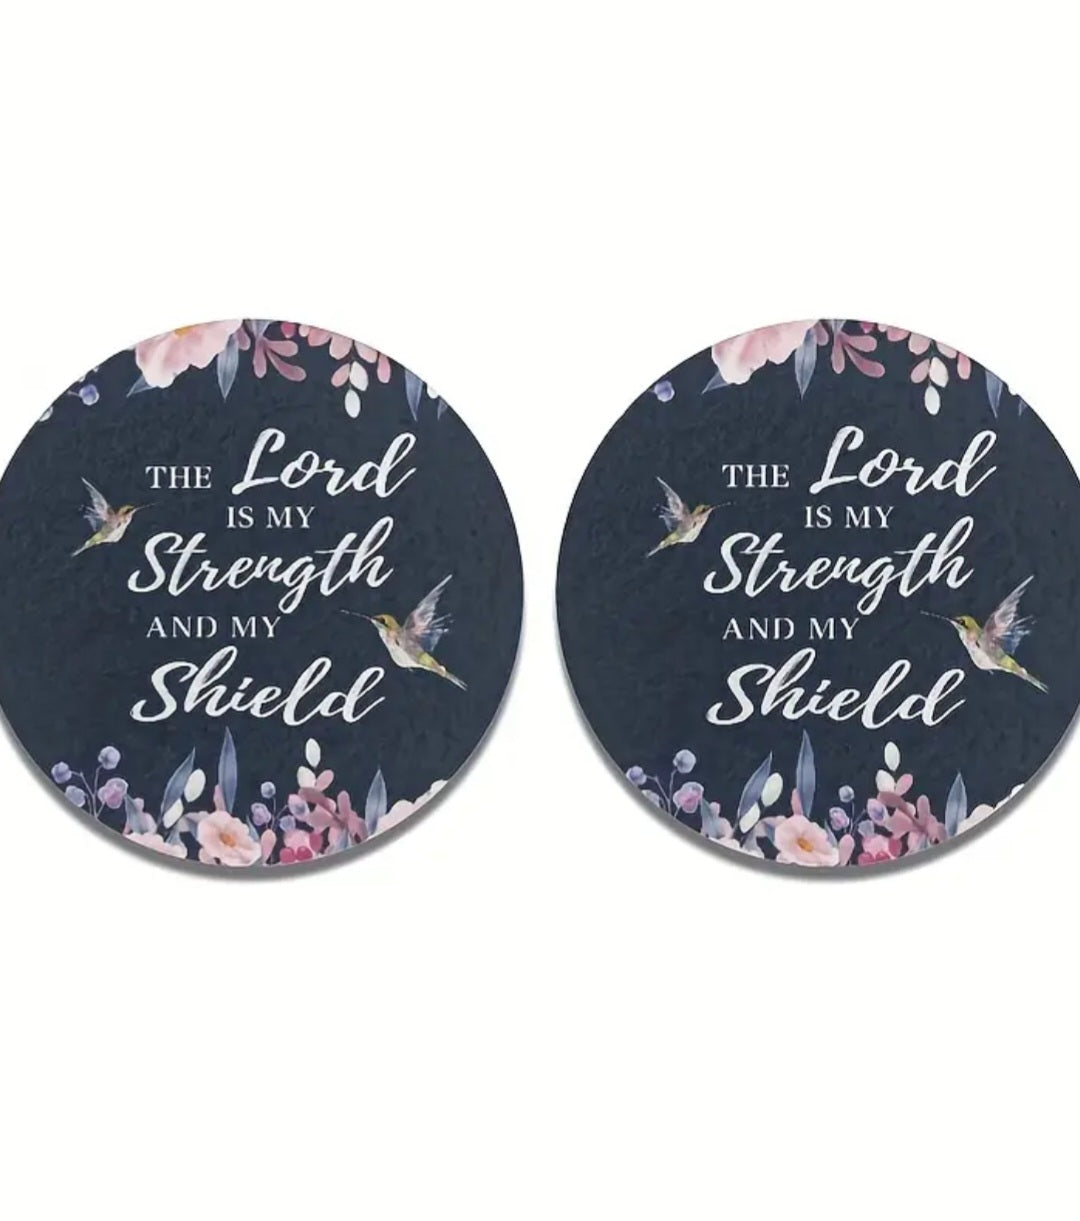 Car Cup Holder Coasters - The Lord is my Strength